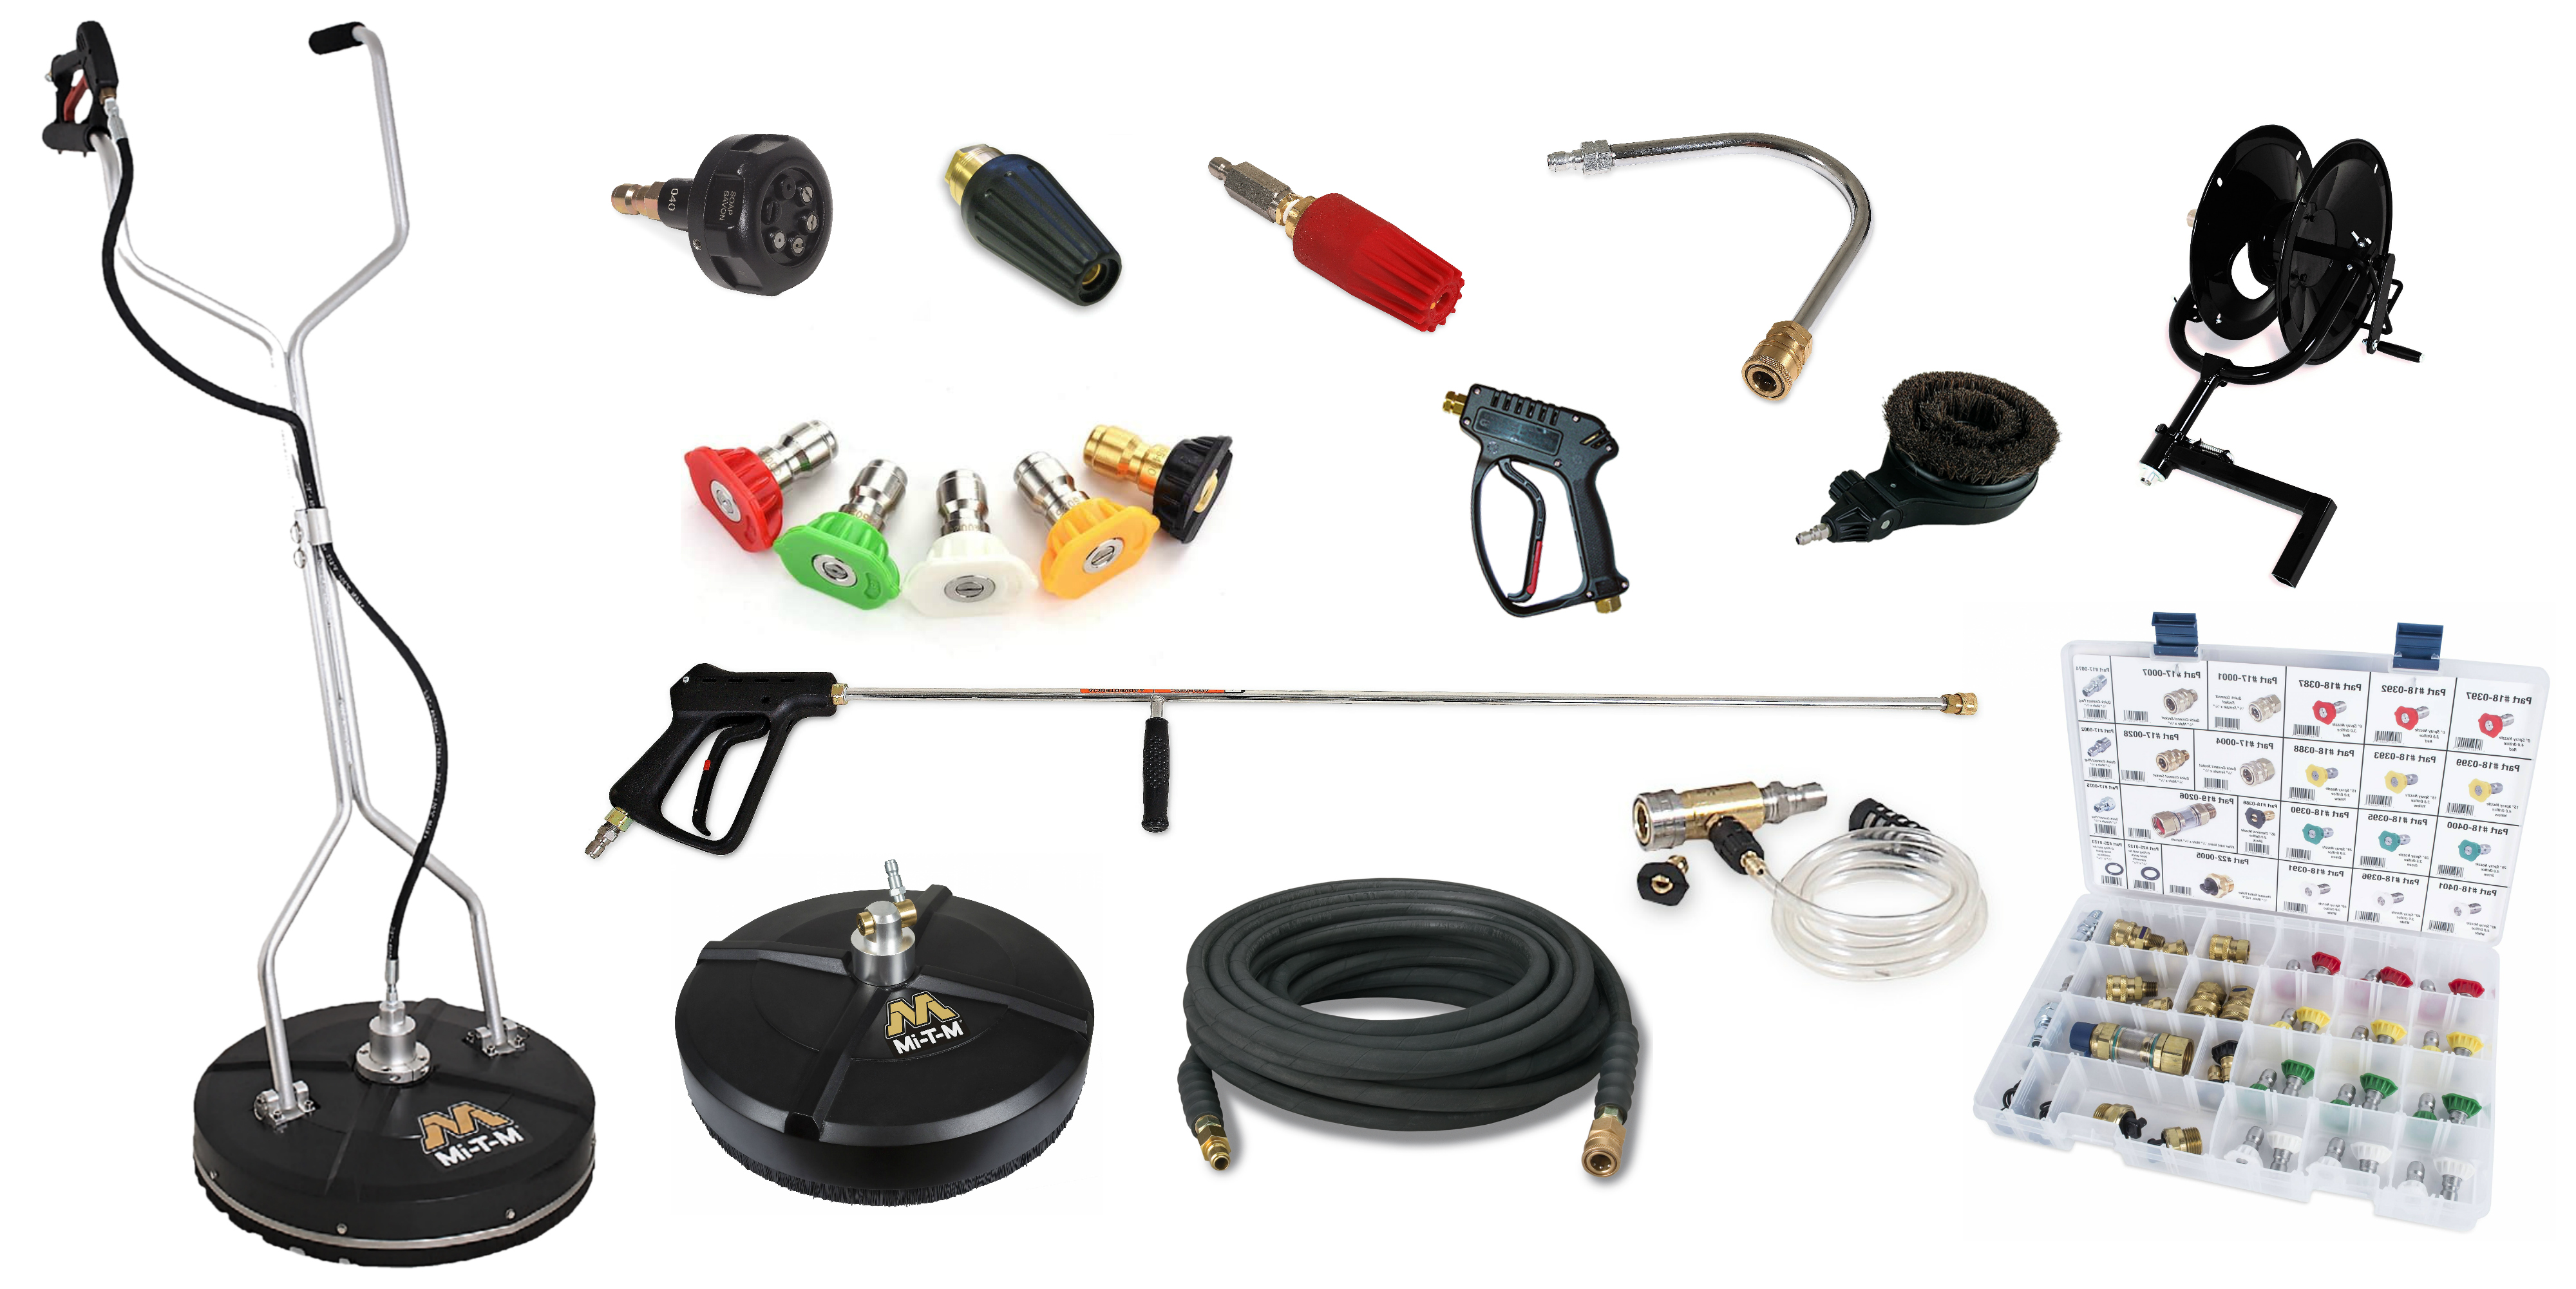 The Ultimate Pressure Washer Accessory Guide from